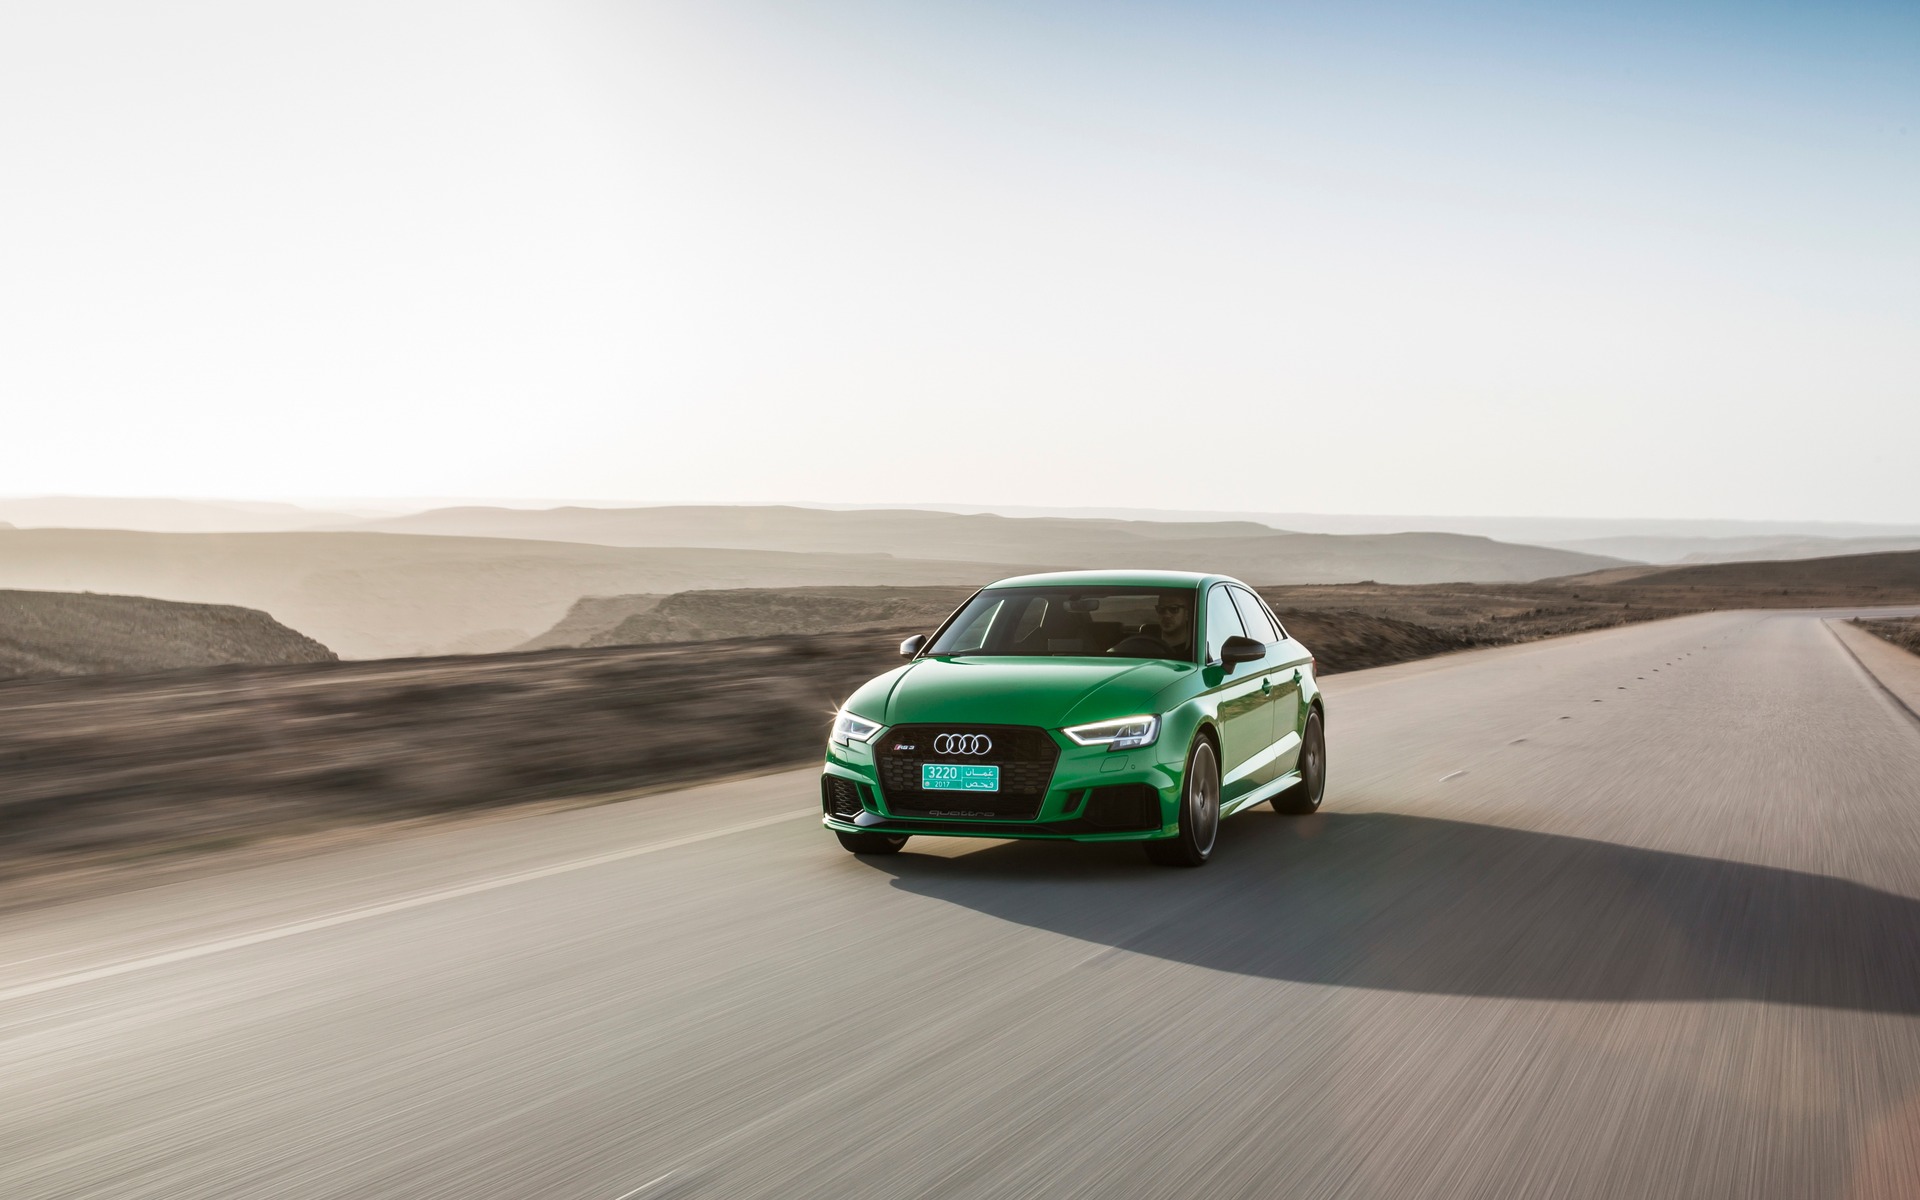 <p>2018 Audi RS 3 - 394 horsepower and 354 pound-feet of torque.</p>